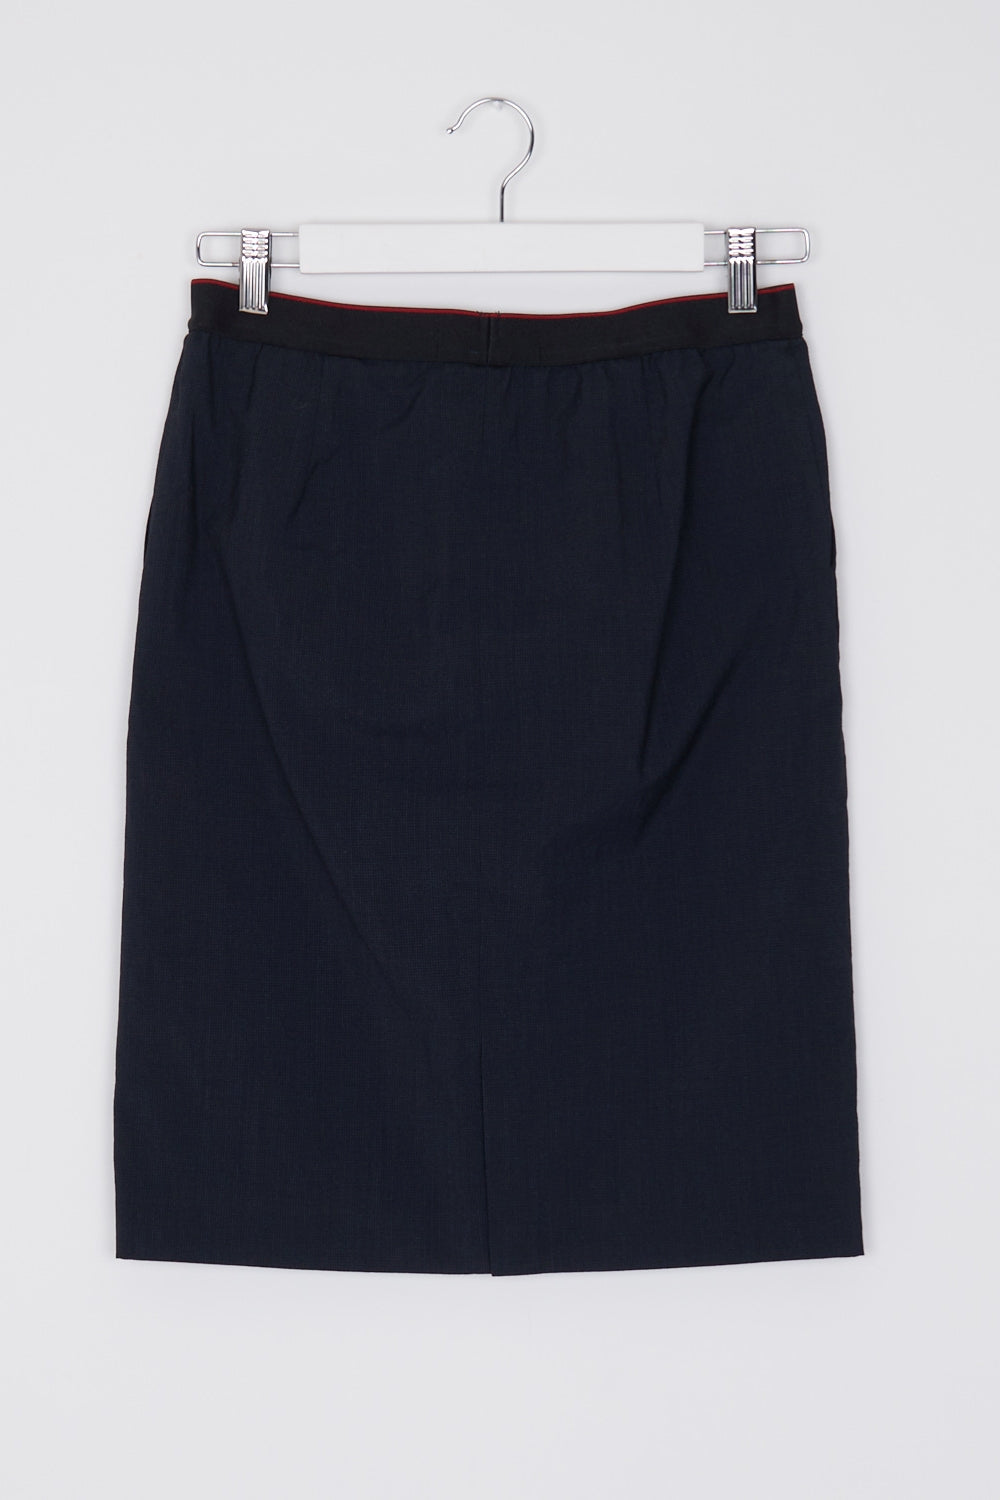 Uniqlo Navy Wool Blended Tight Fit Skirt S